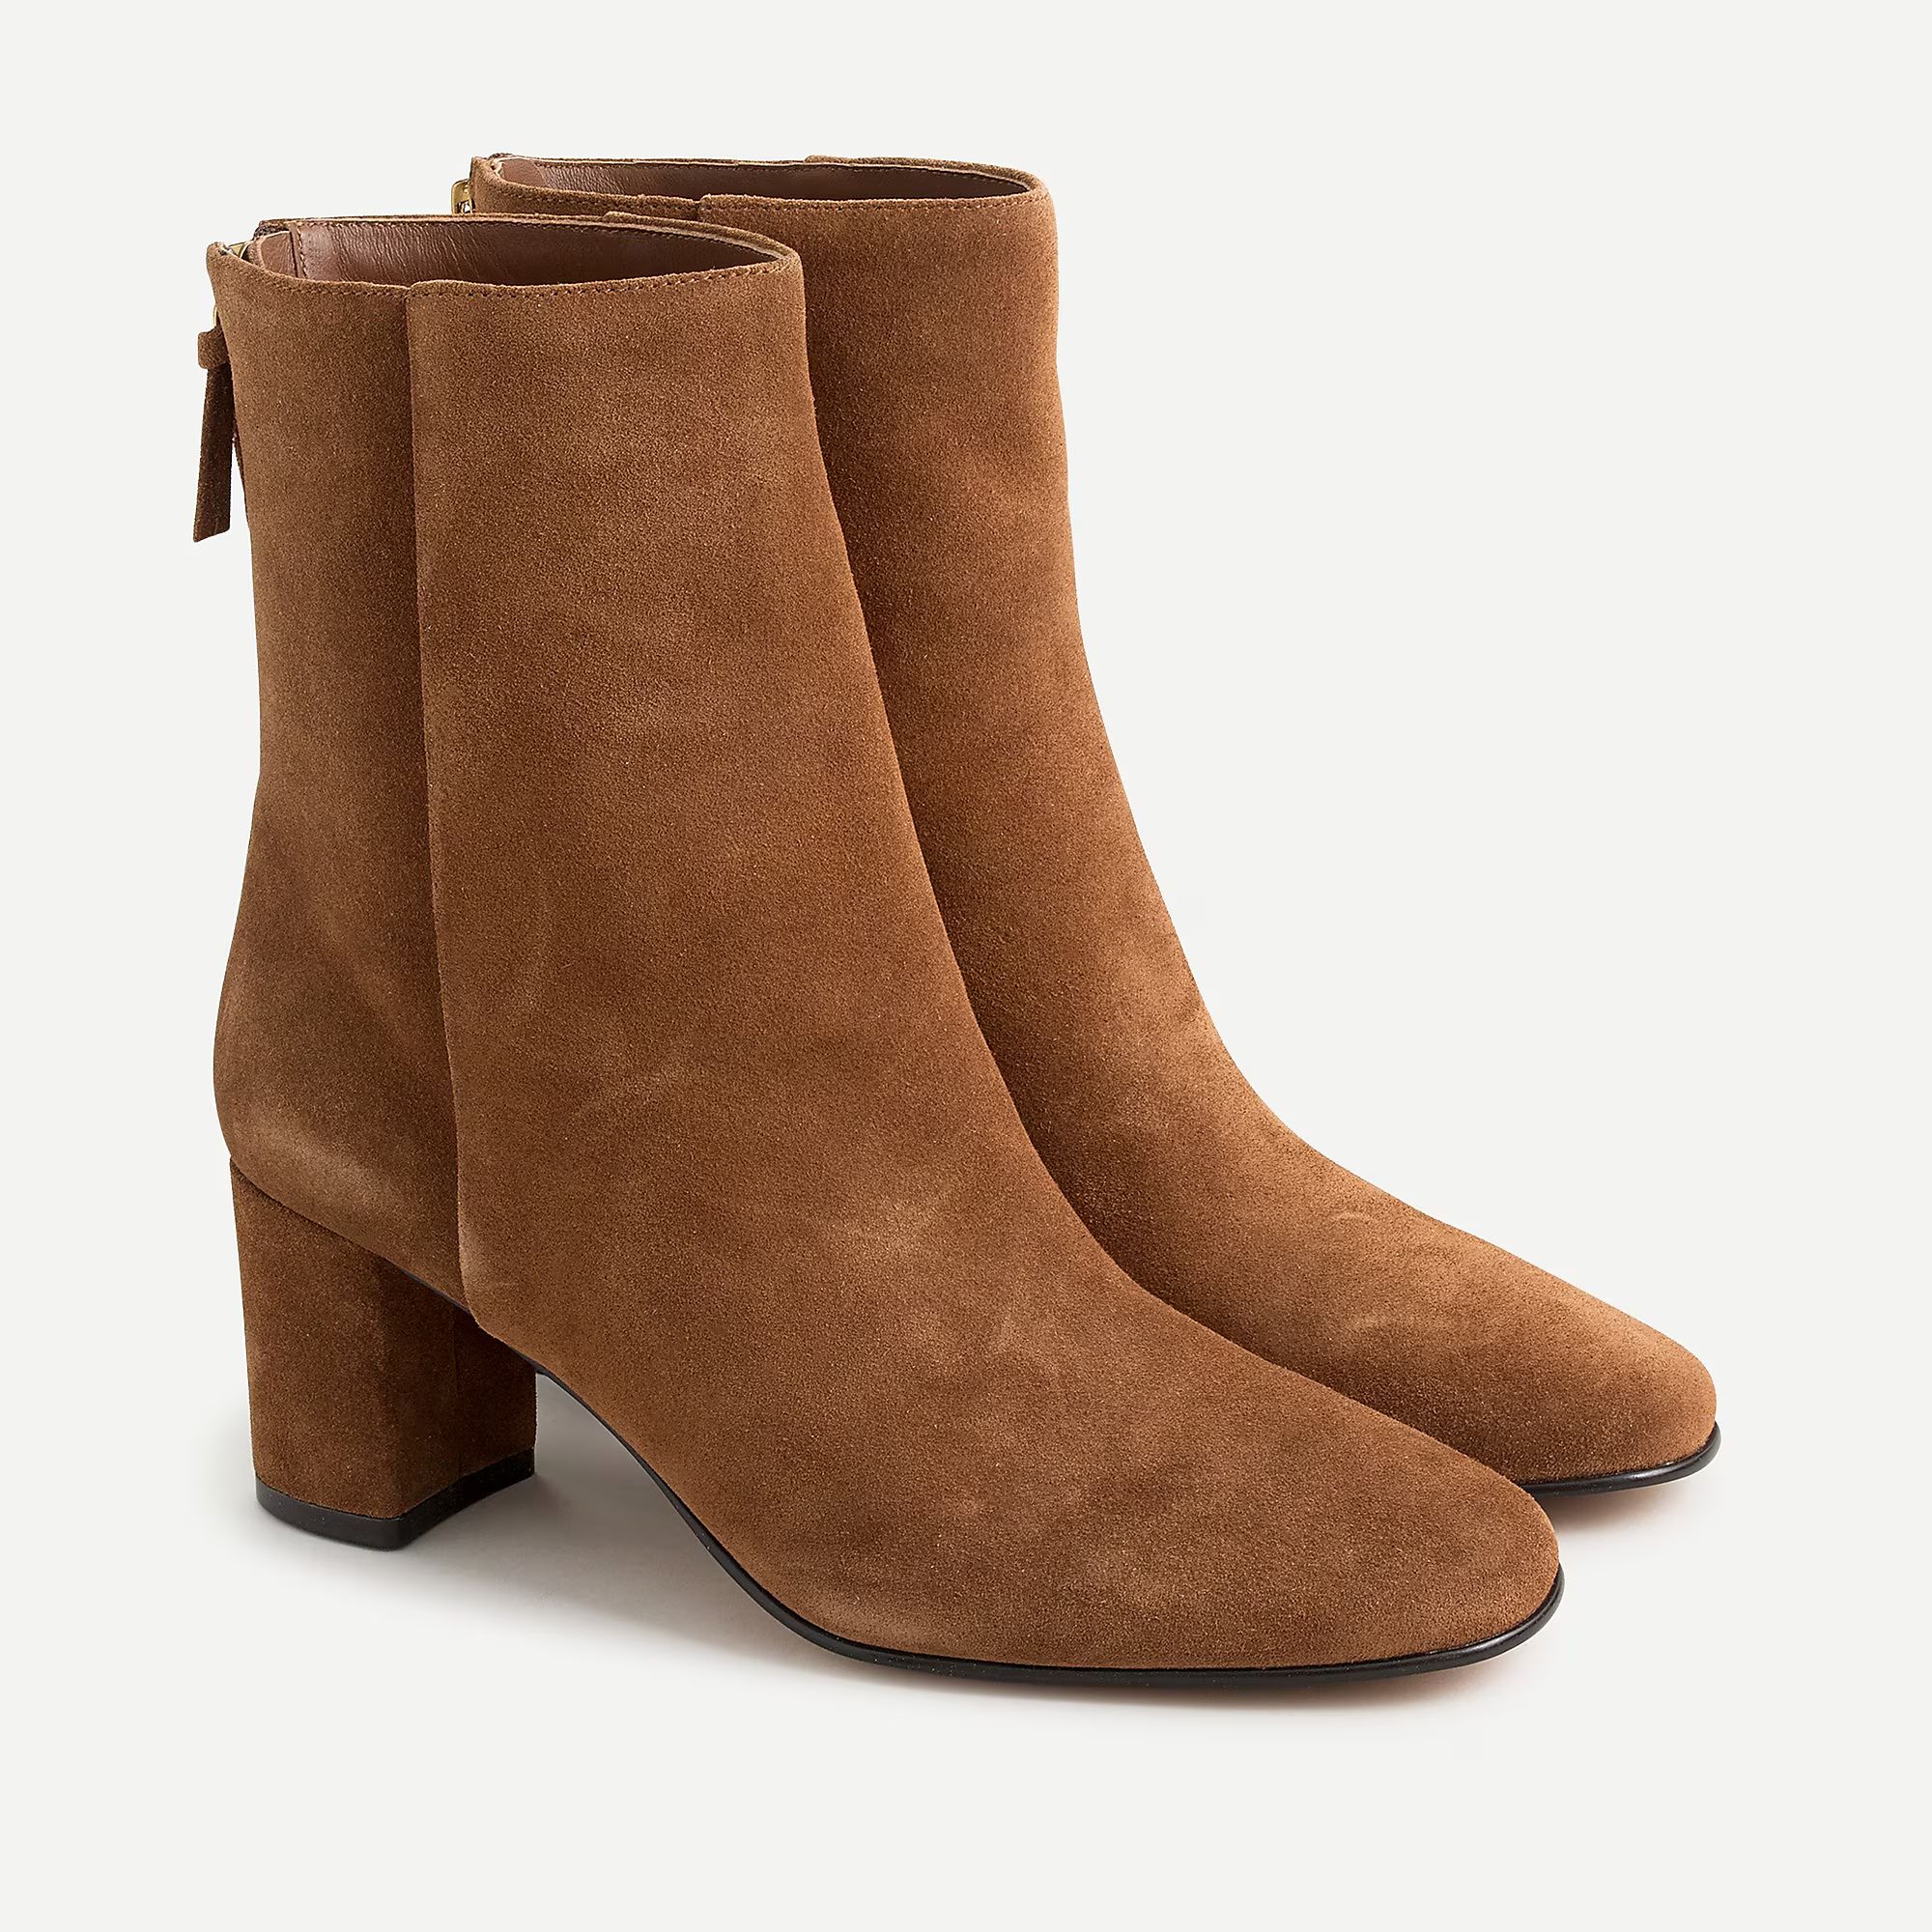 Suede ankle boots | J.Crew US